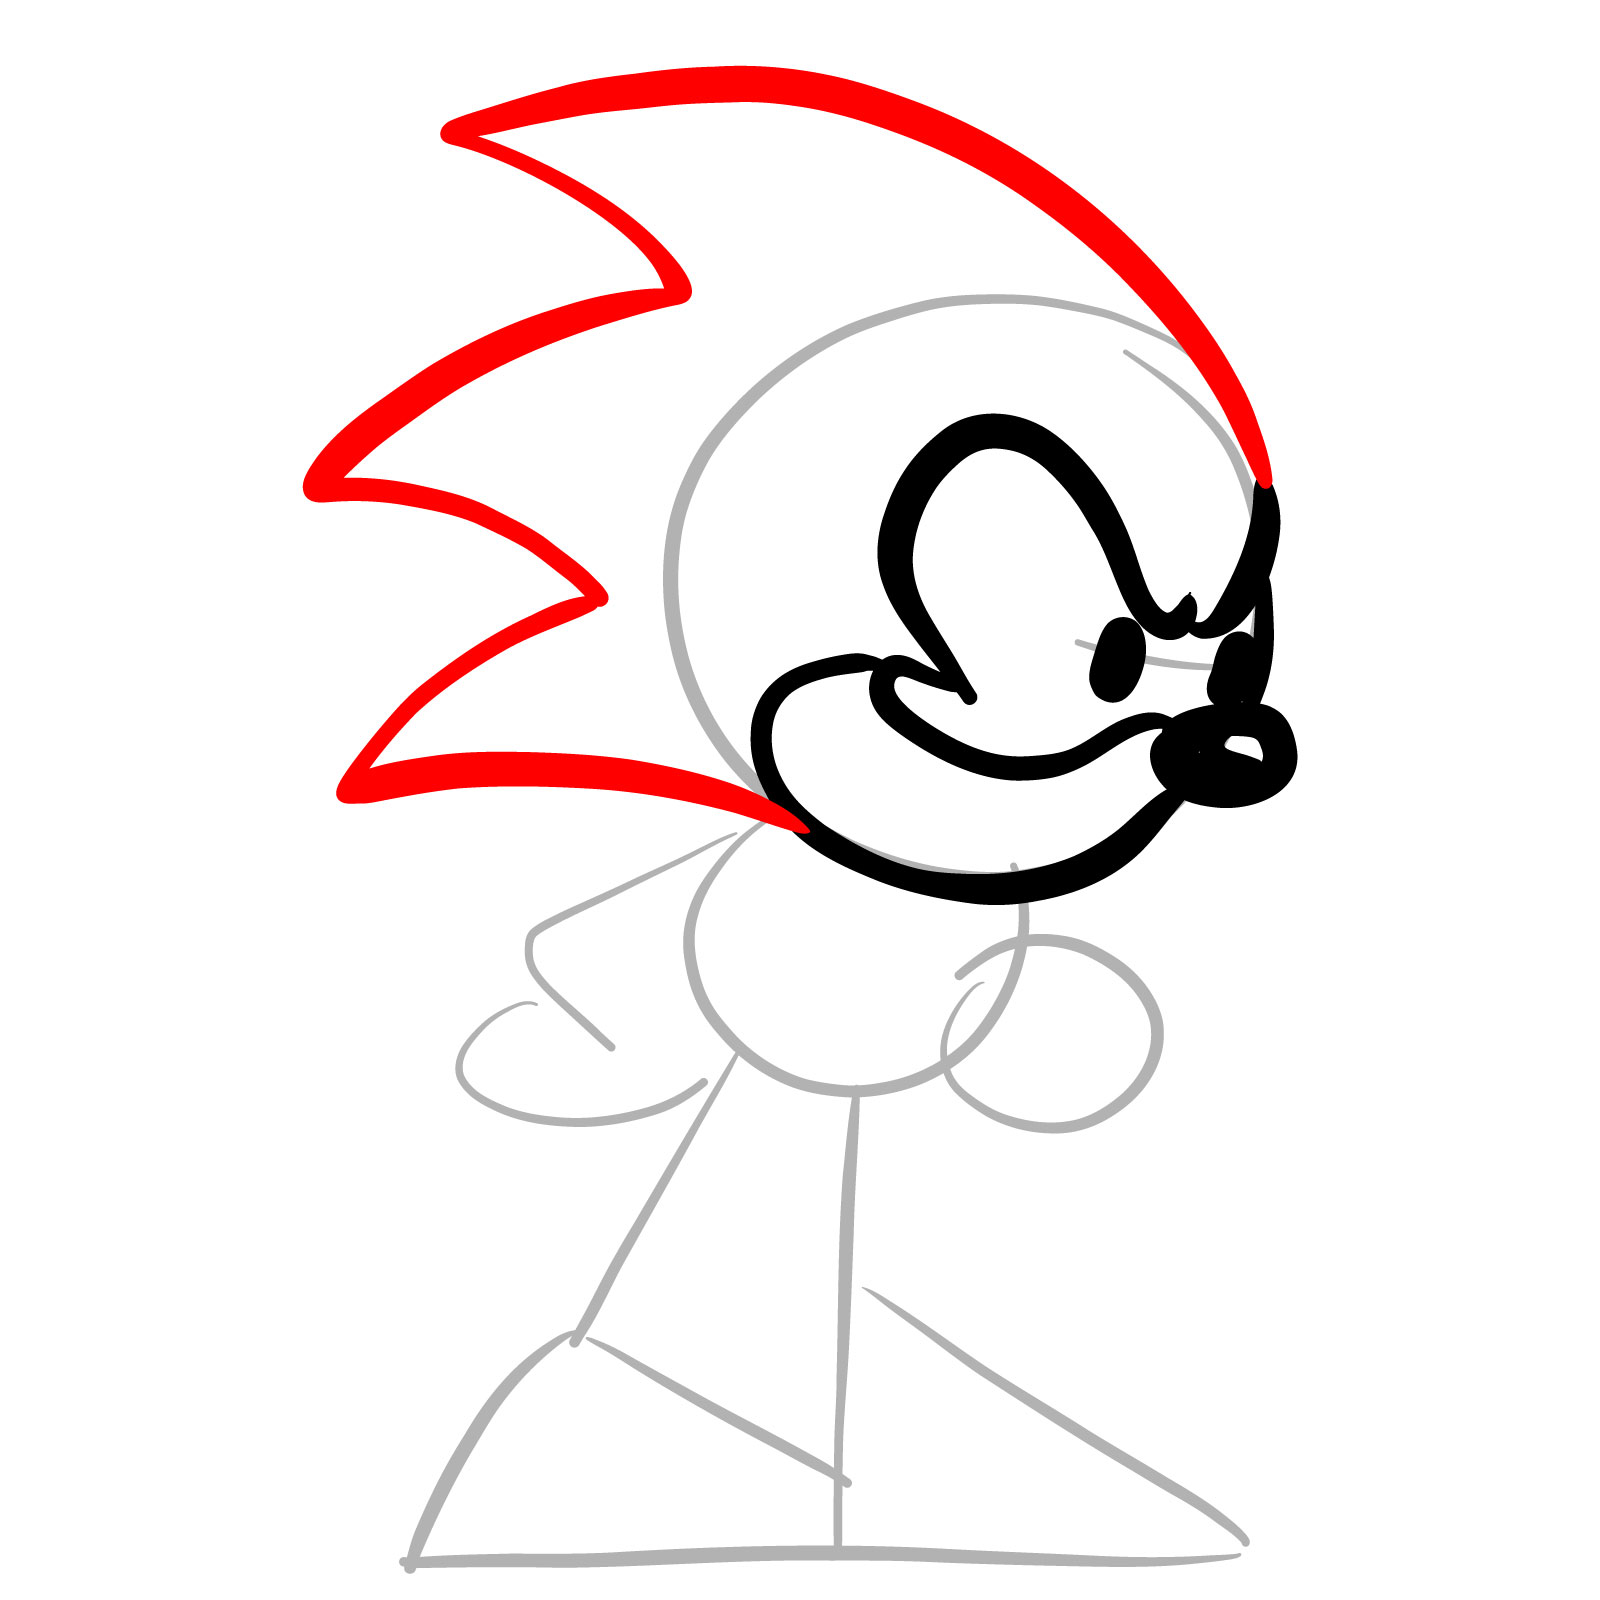 How to draw Sonic.Exe - FNF - Sketchok easy drawing guides